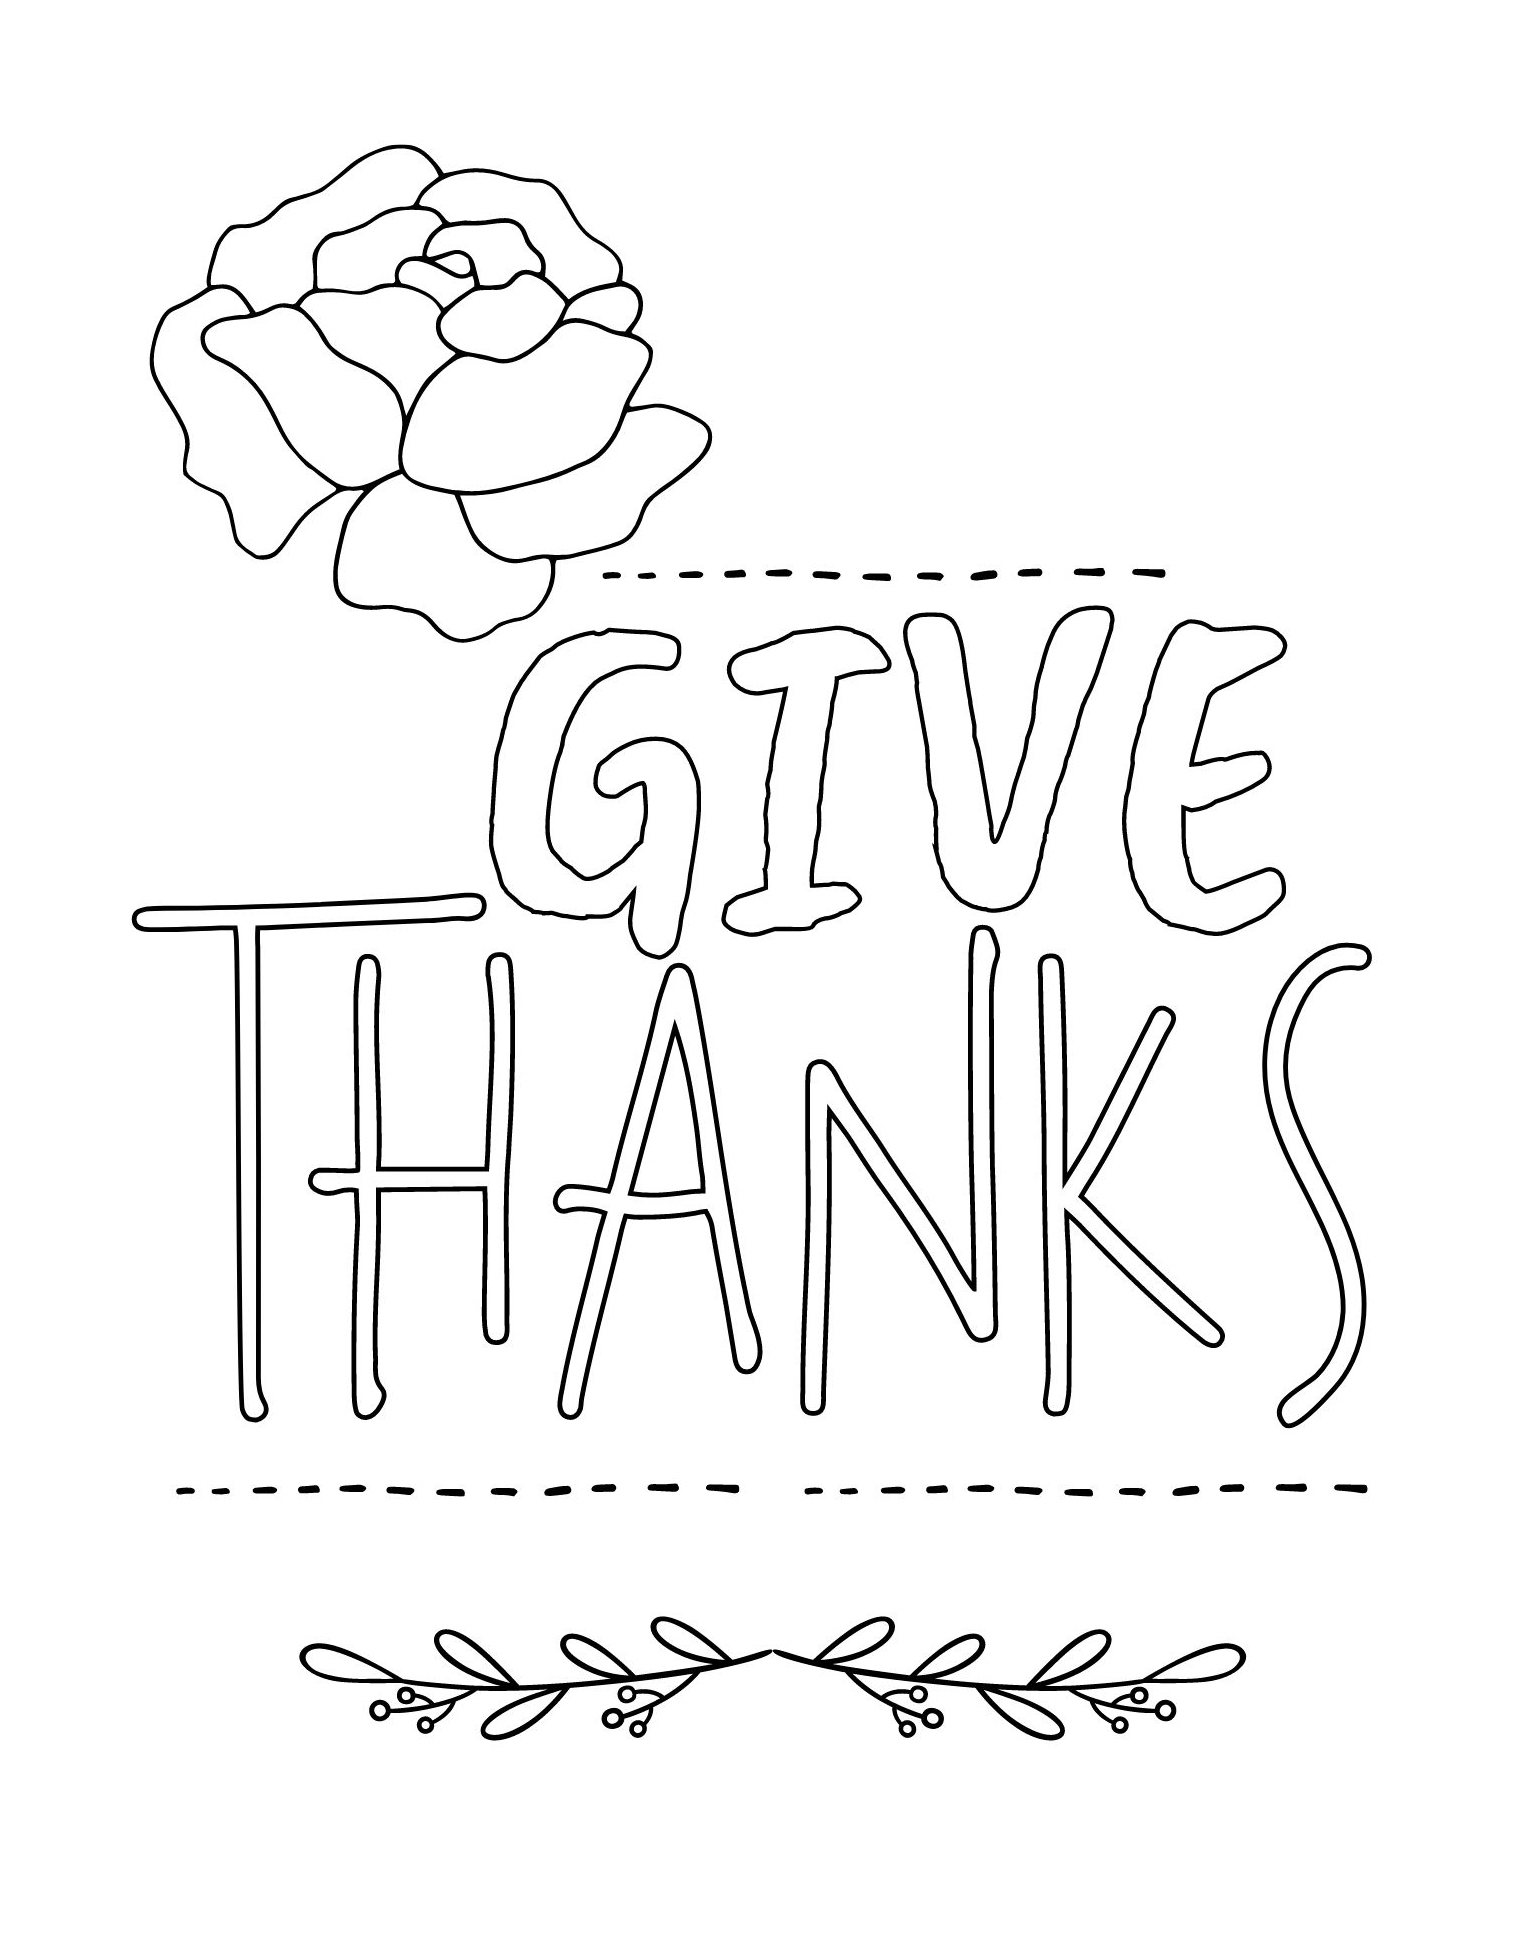 Gratitude Coloring Pages - Gift of Curiosity